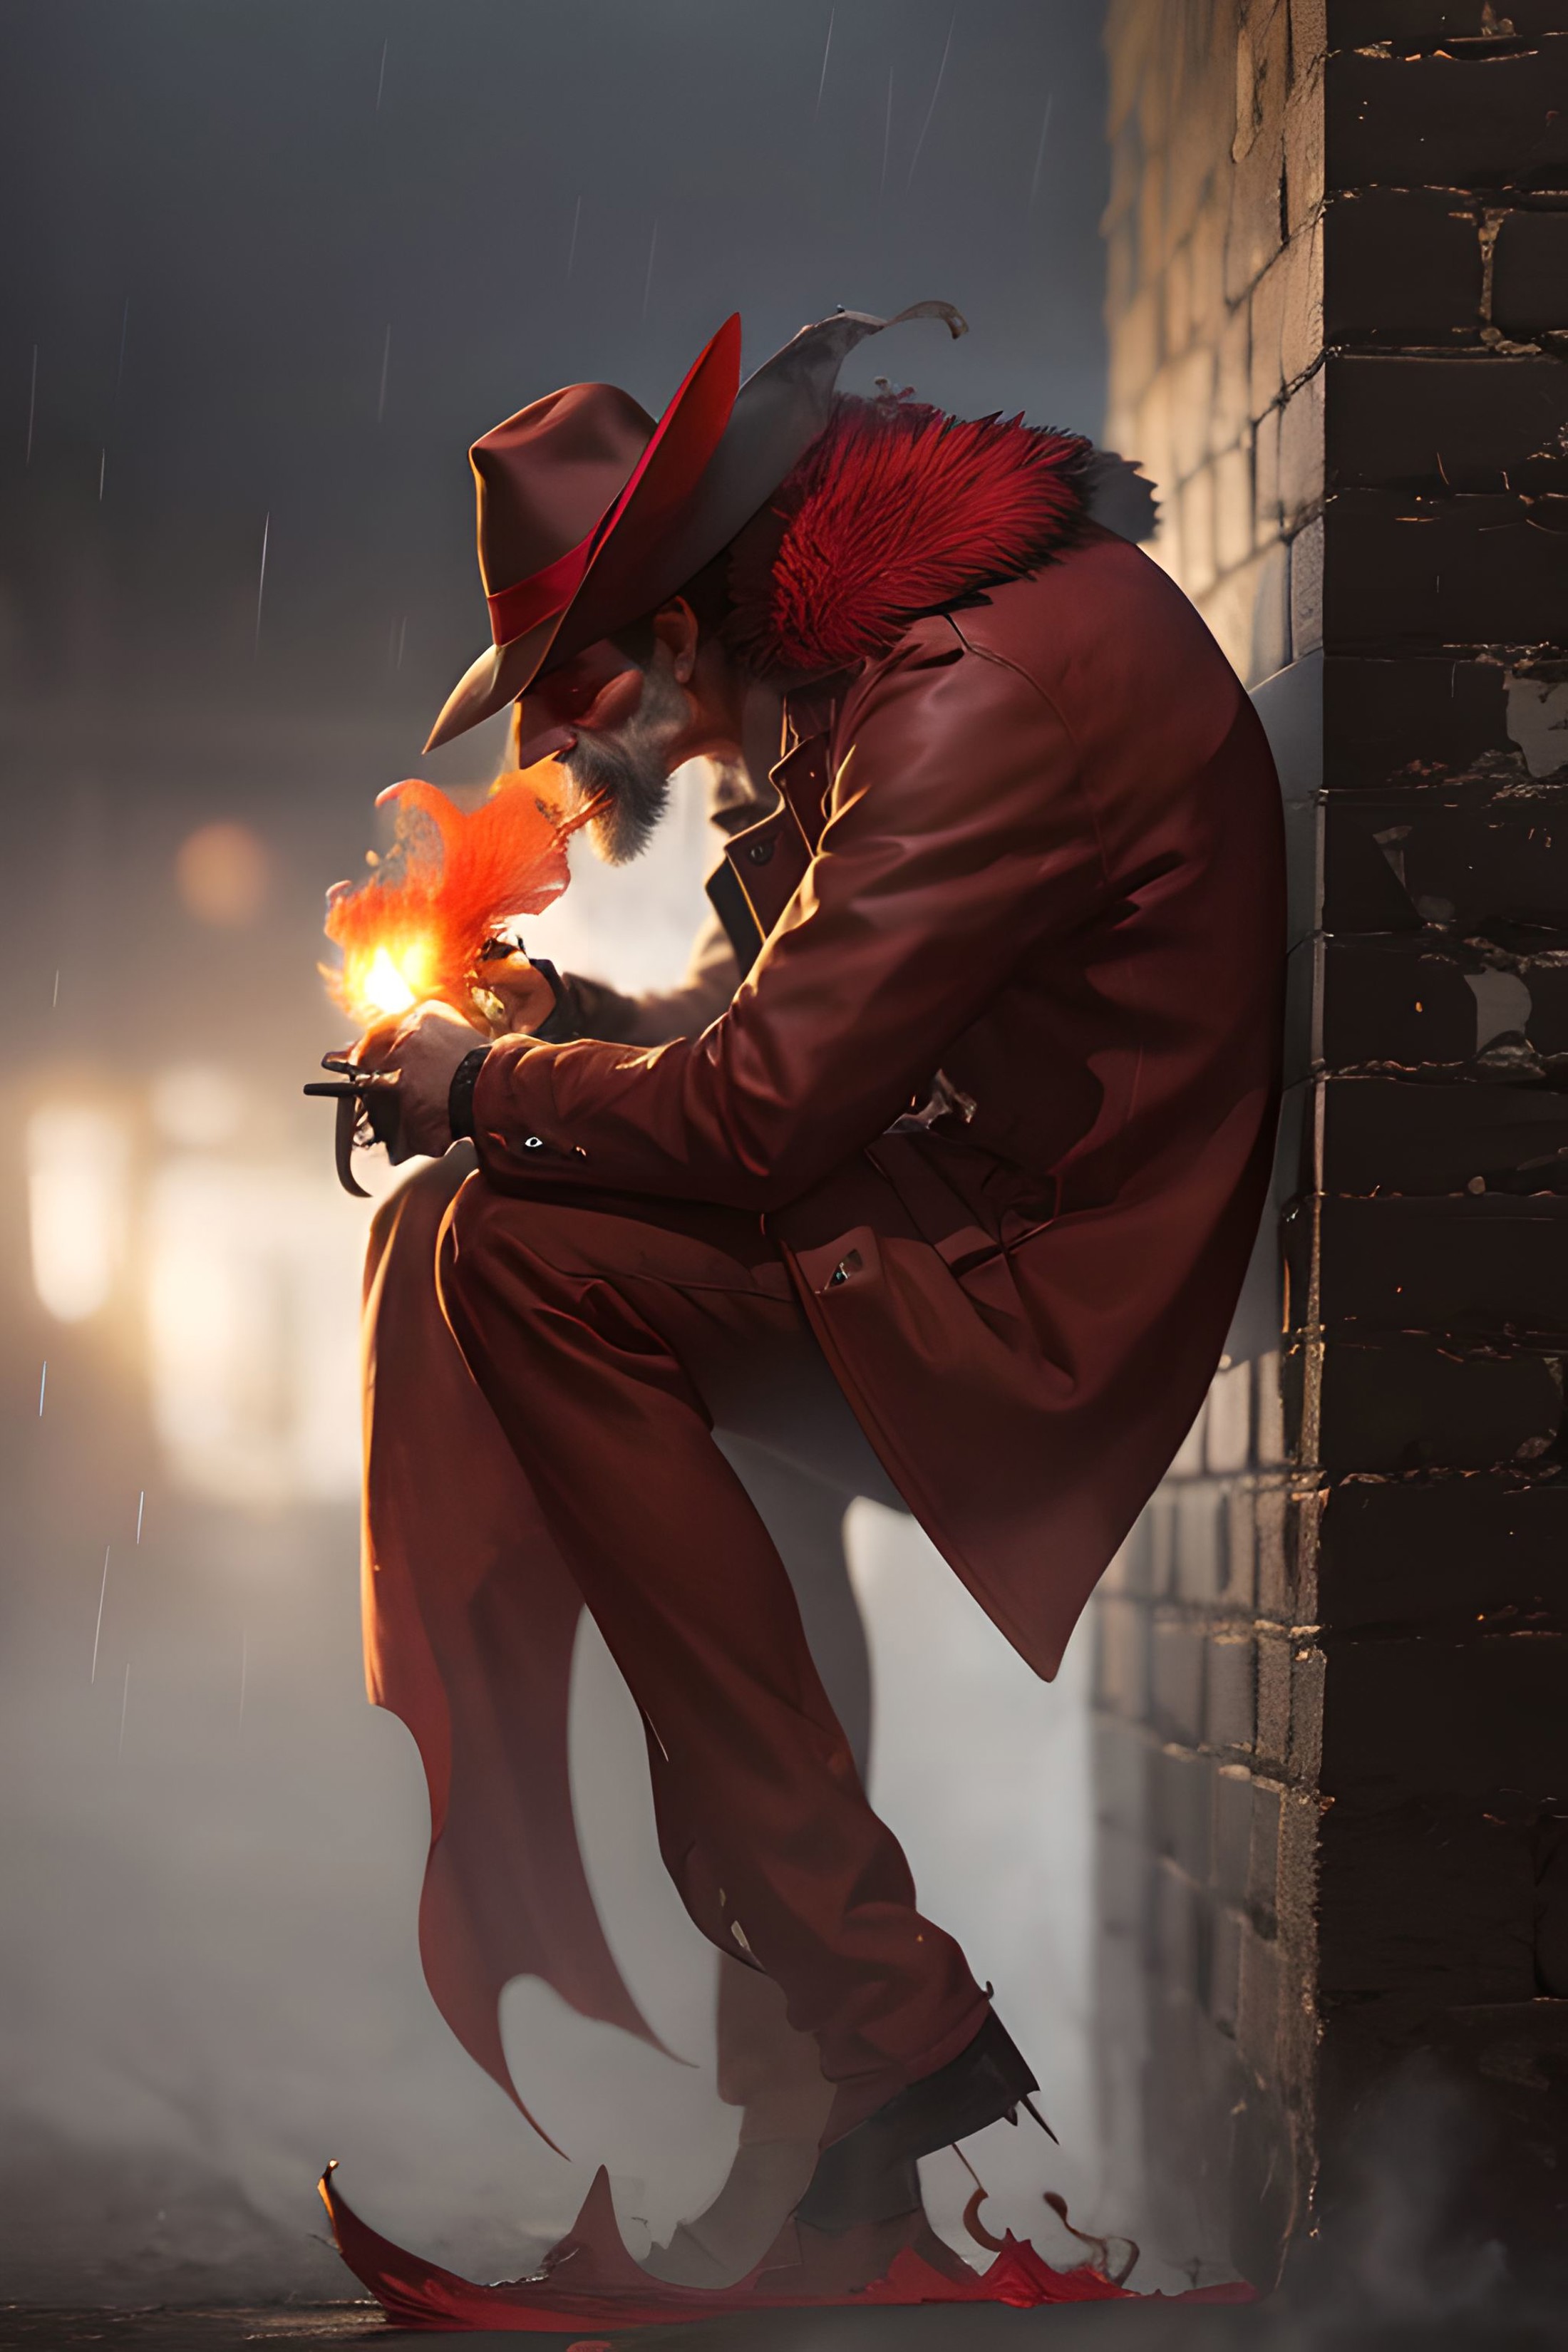 [monster:Noir detective:0.5], leaning on a brick wall, rain, grizzled, fedora, trenchcoat, side view, smoking a cigar, hol...